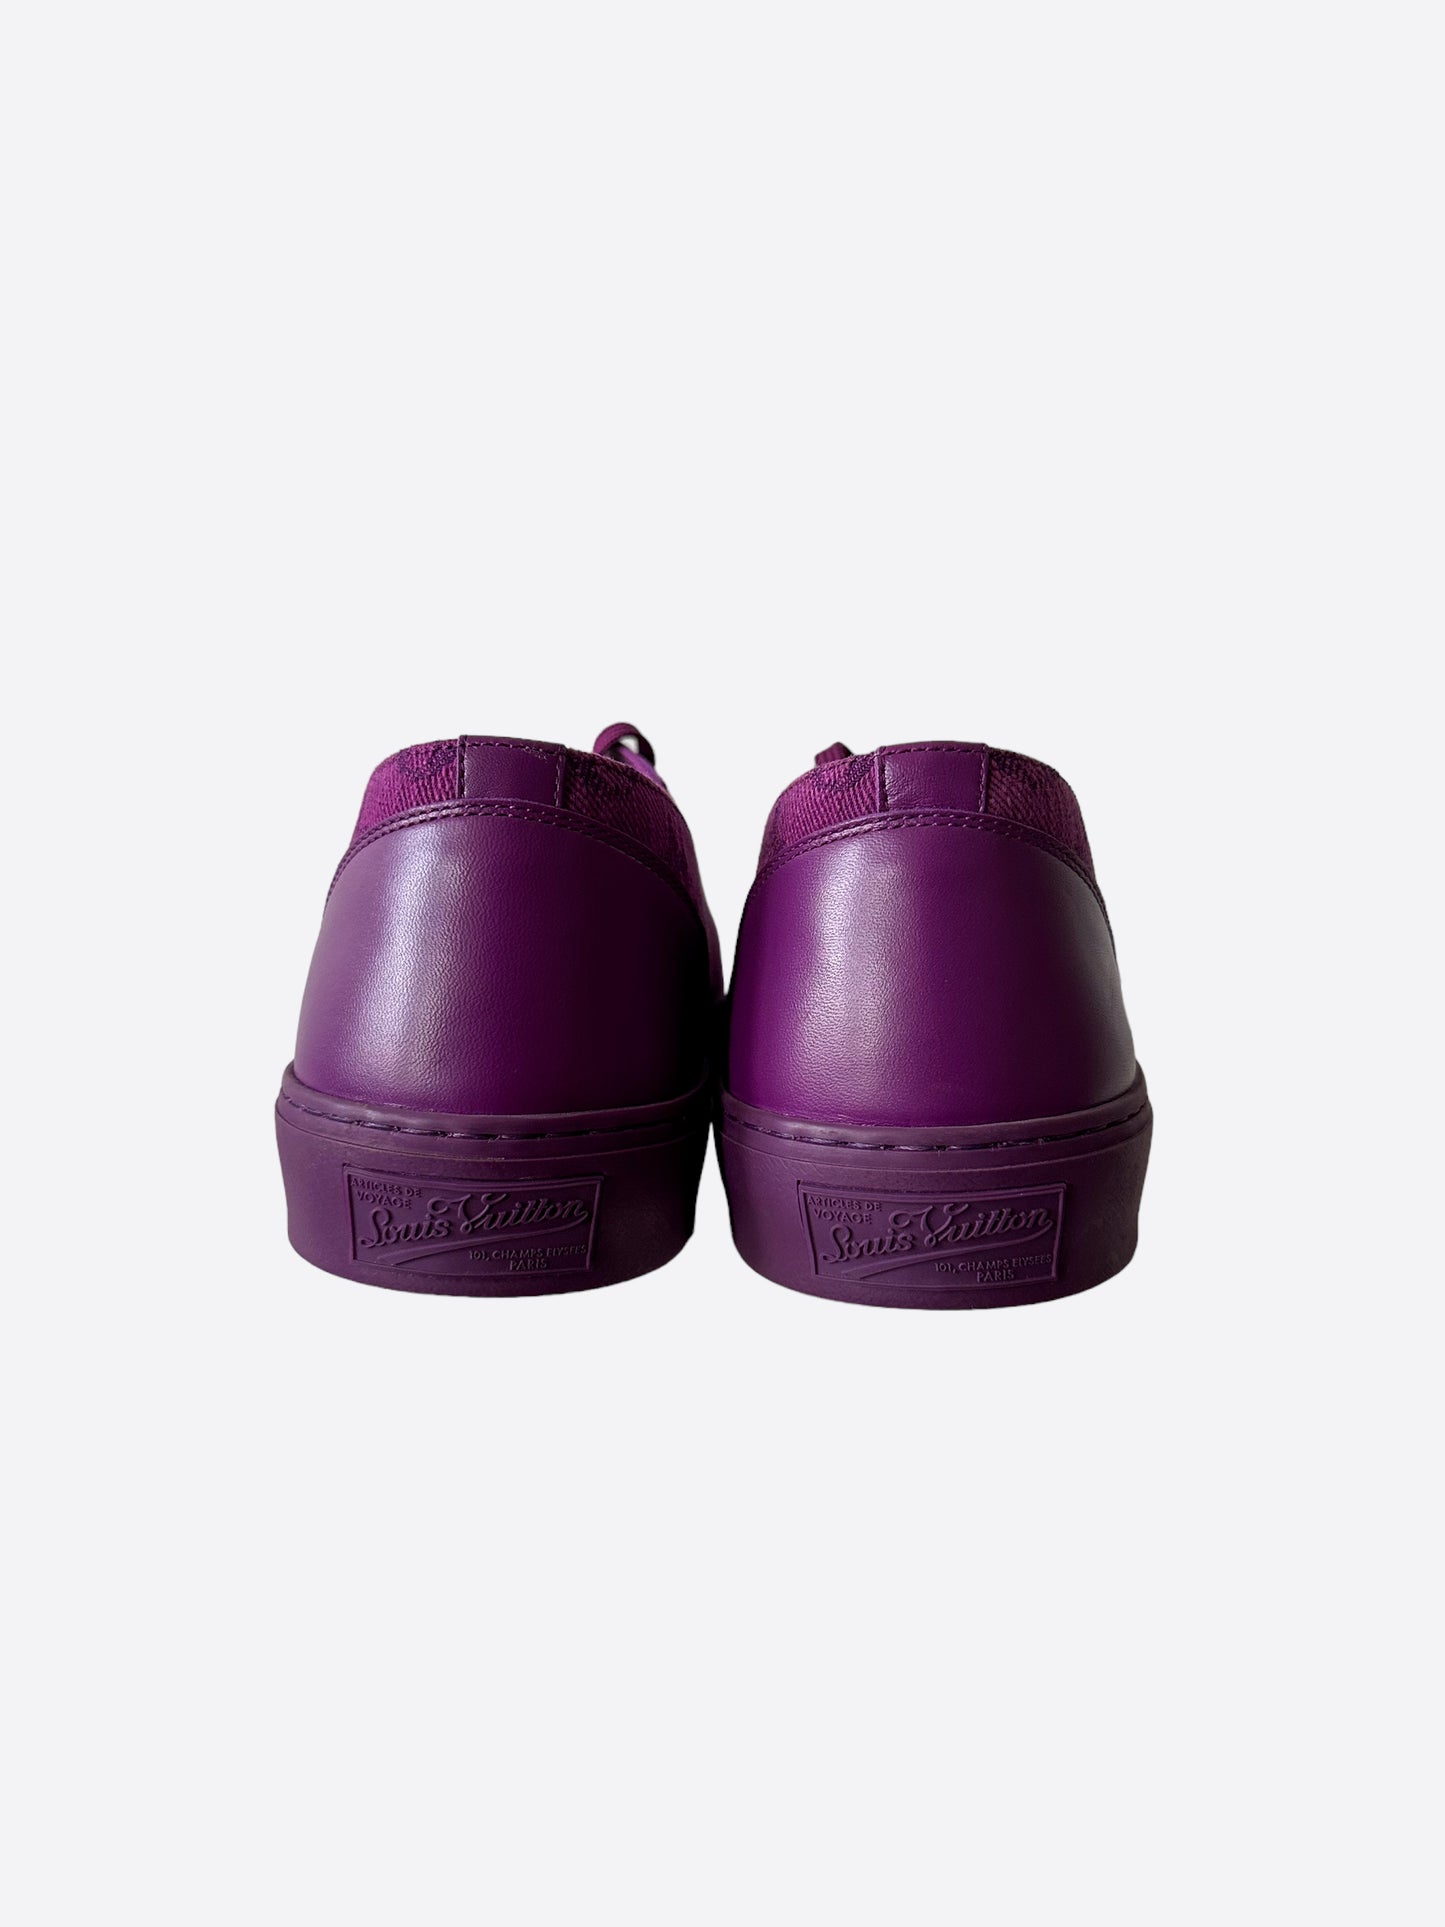 pink and purple louis vuitton shoes